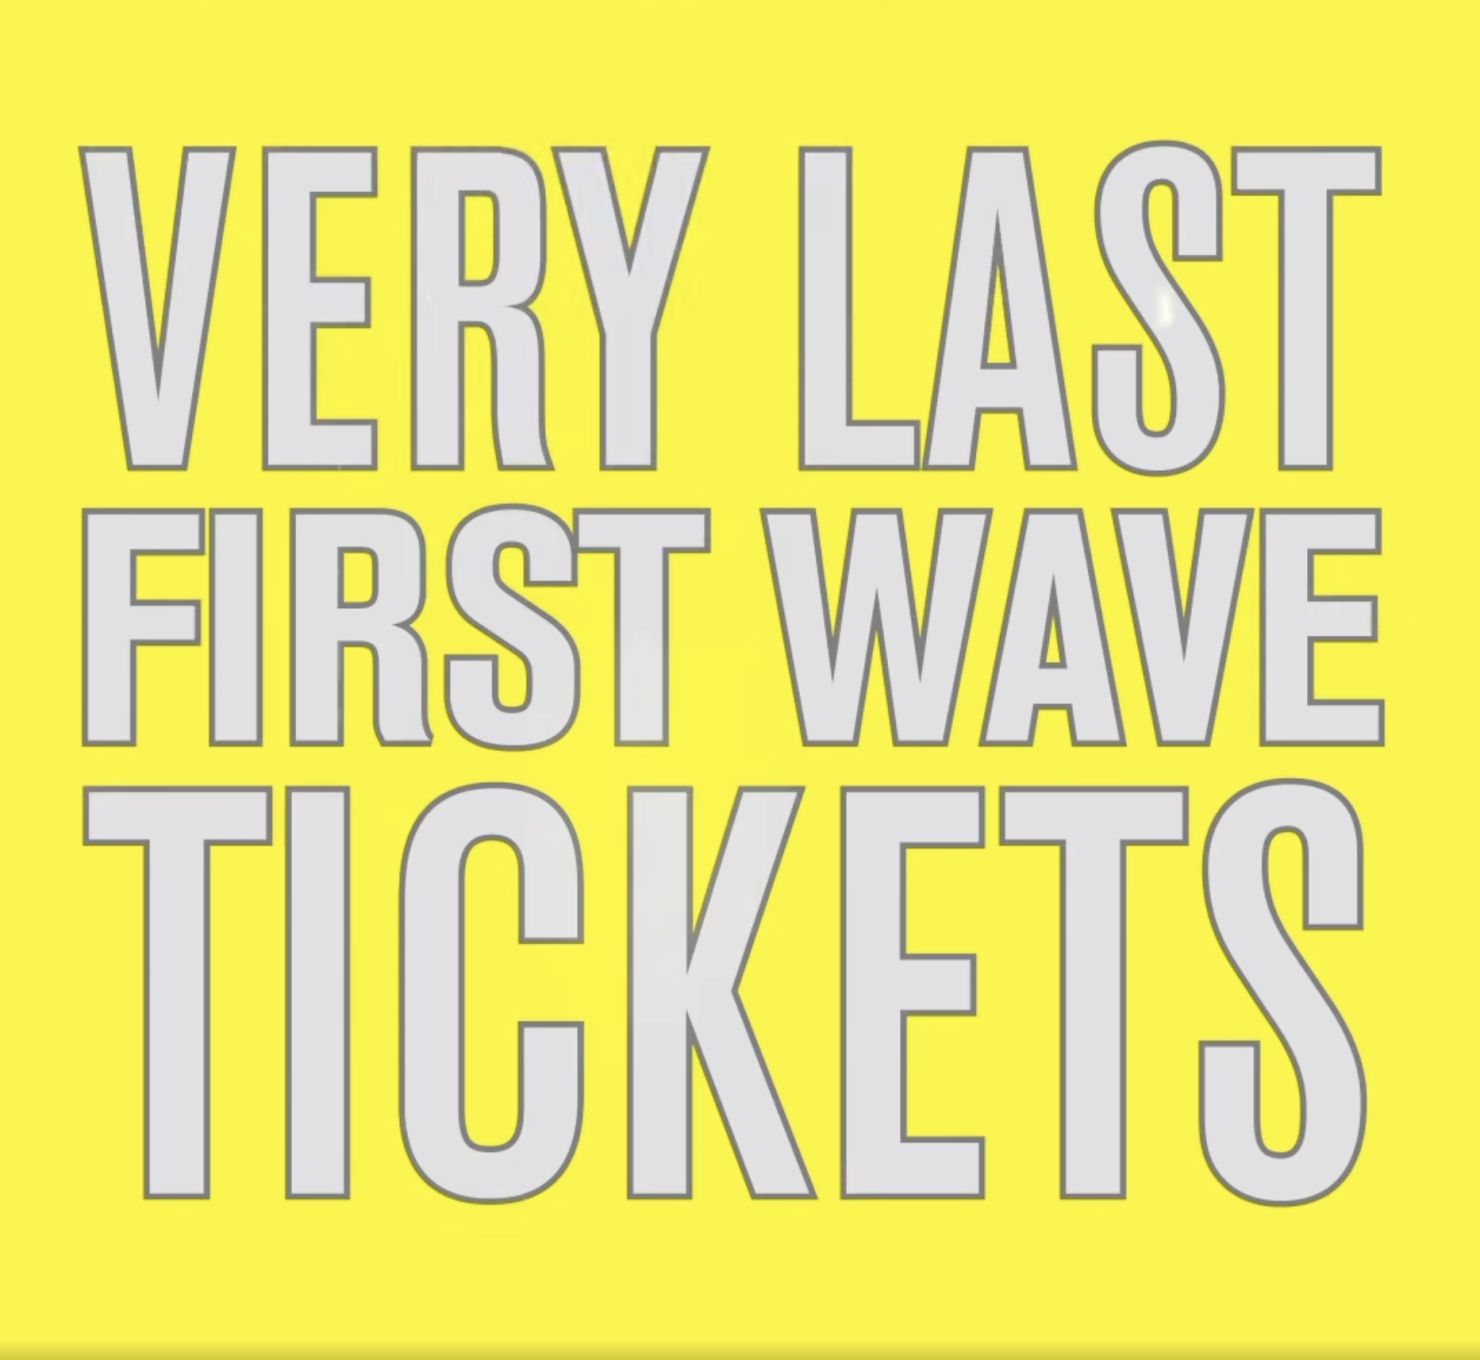 FIRST WAVE TICKETS FOR ADE WILL SELL OUT!